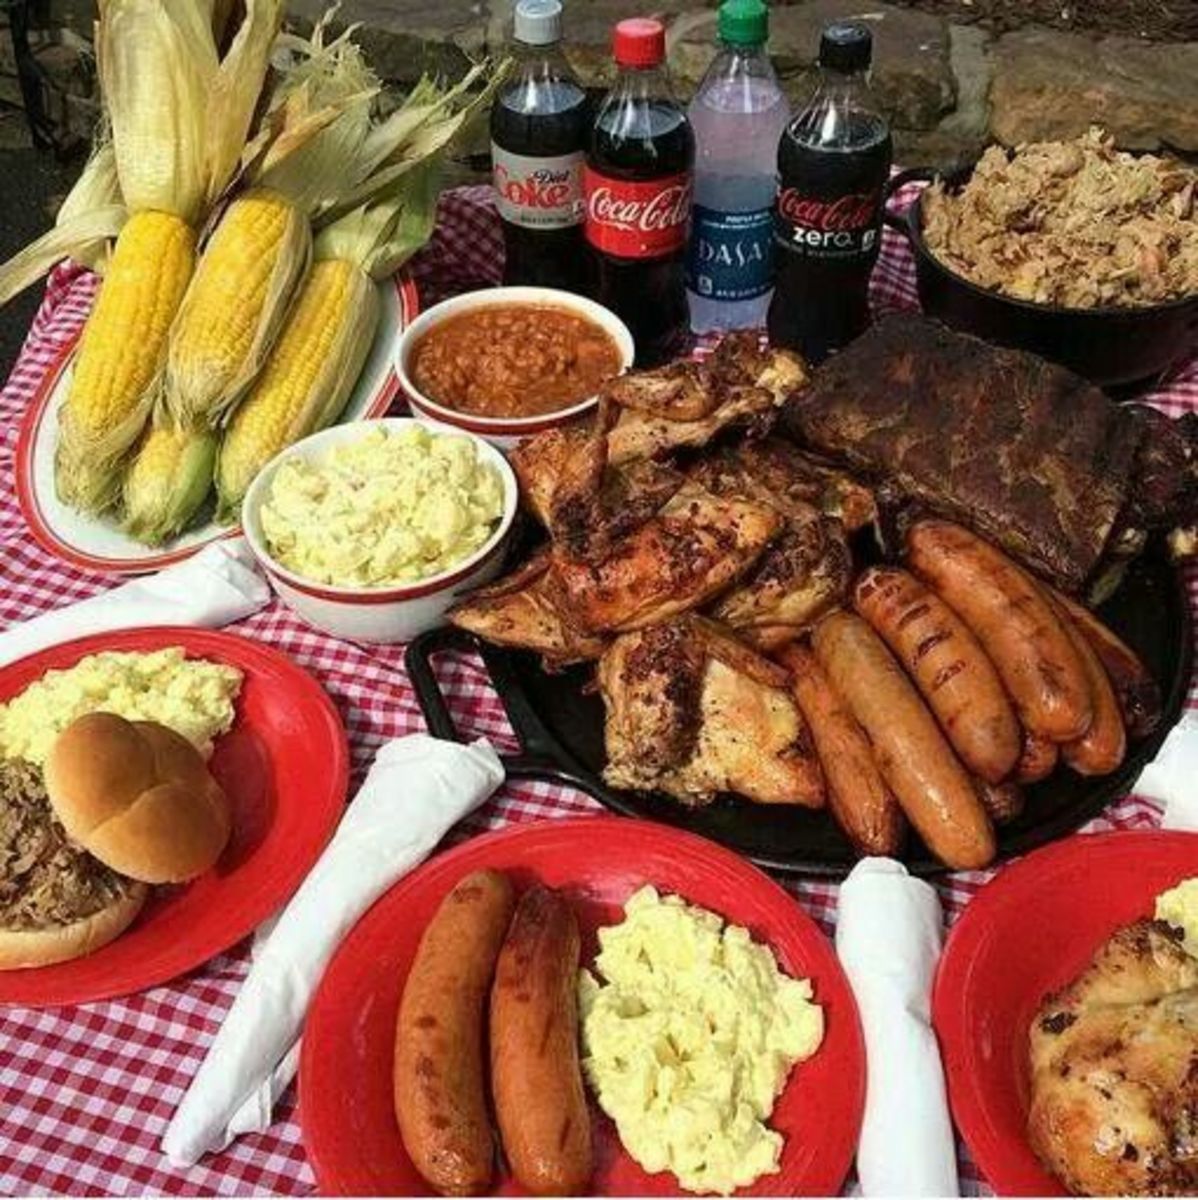 bbq-party-ideas